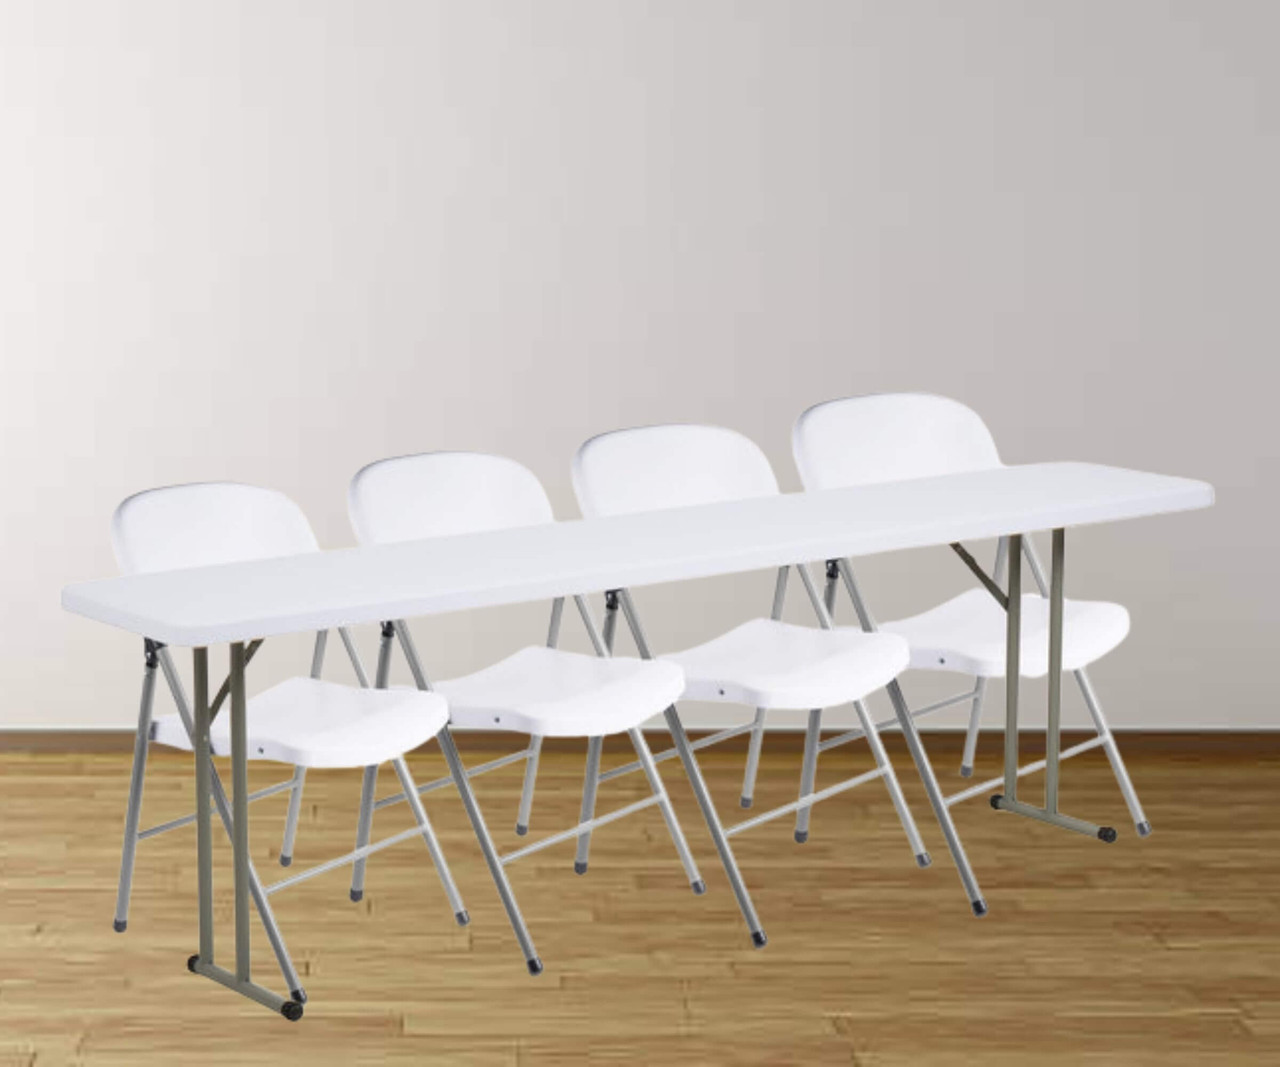 CP Granite White Heavy-Duty Blow Molded Plastic Folding Seminar Table with 4 White Folding Chairs 18" x 96"| Compact Seating Solution for Seminars and Meetings- Chicken Pieces